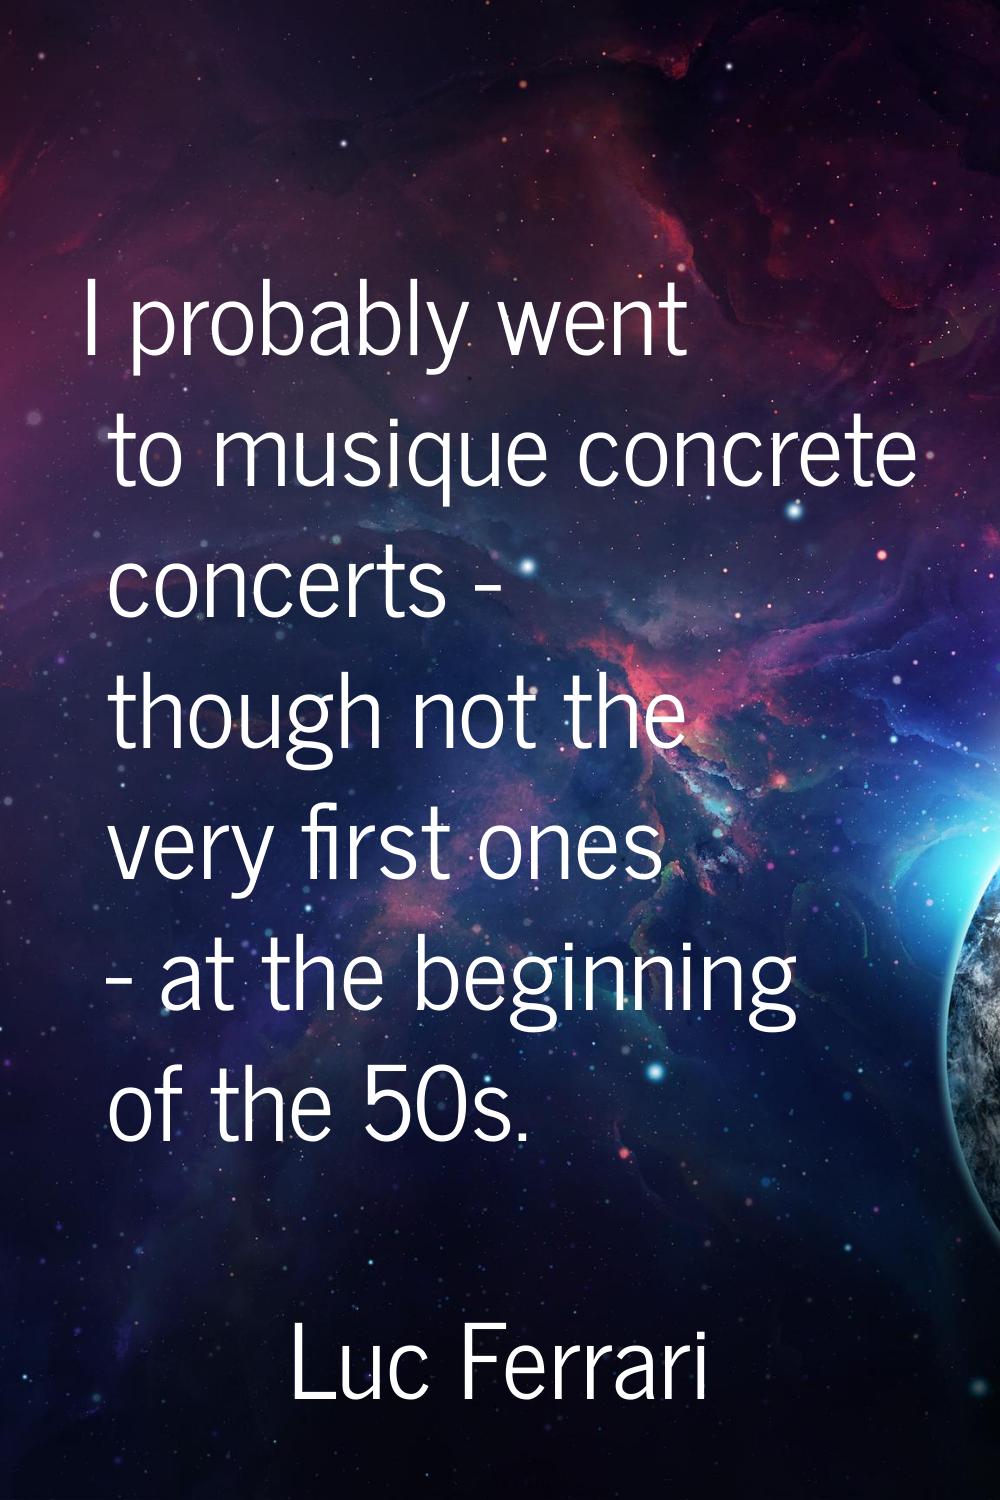 I probably went to musique concrete concerts - though not the very first ones - at the beginning of